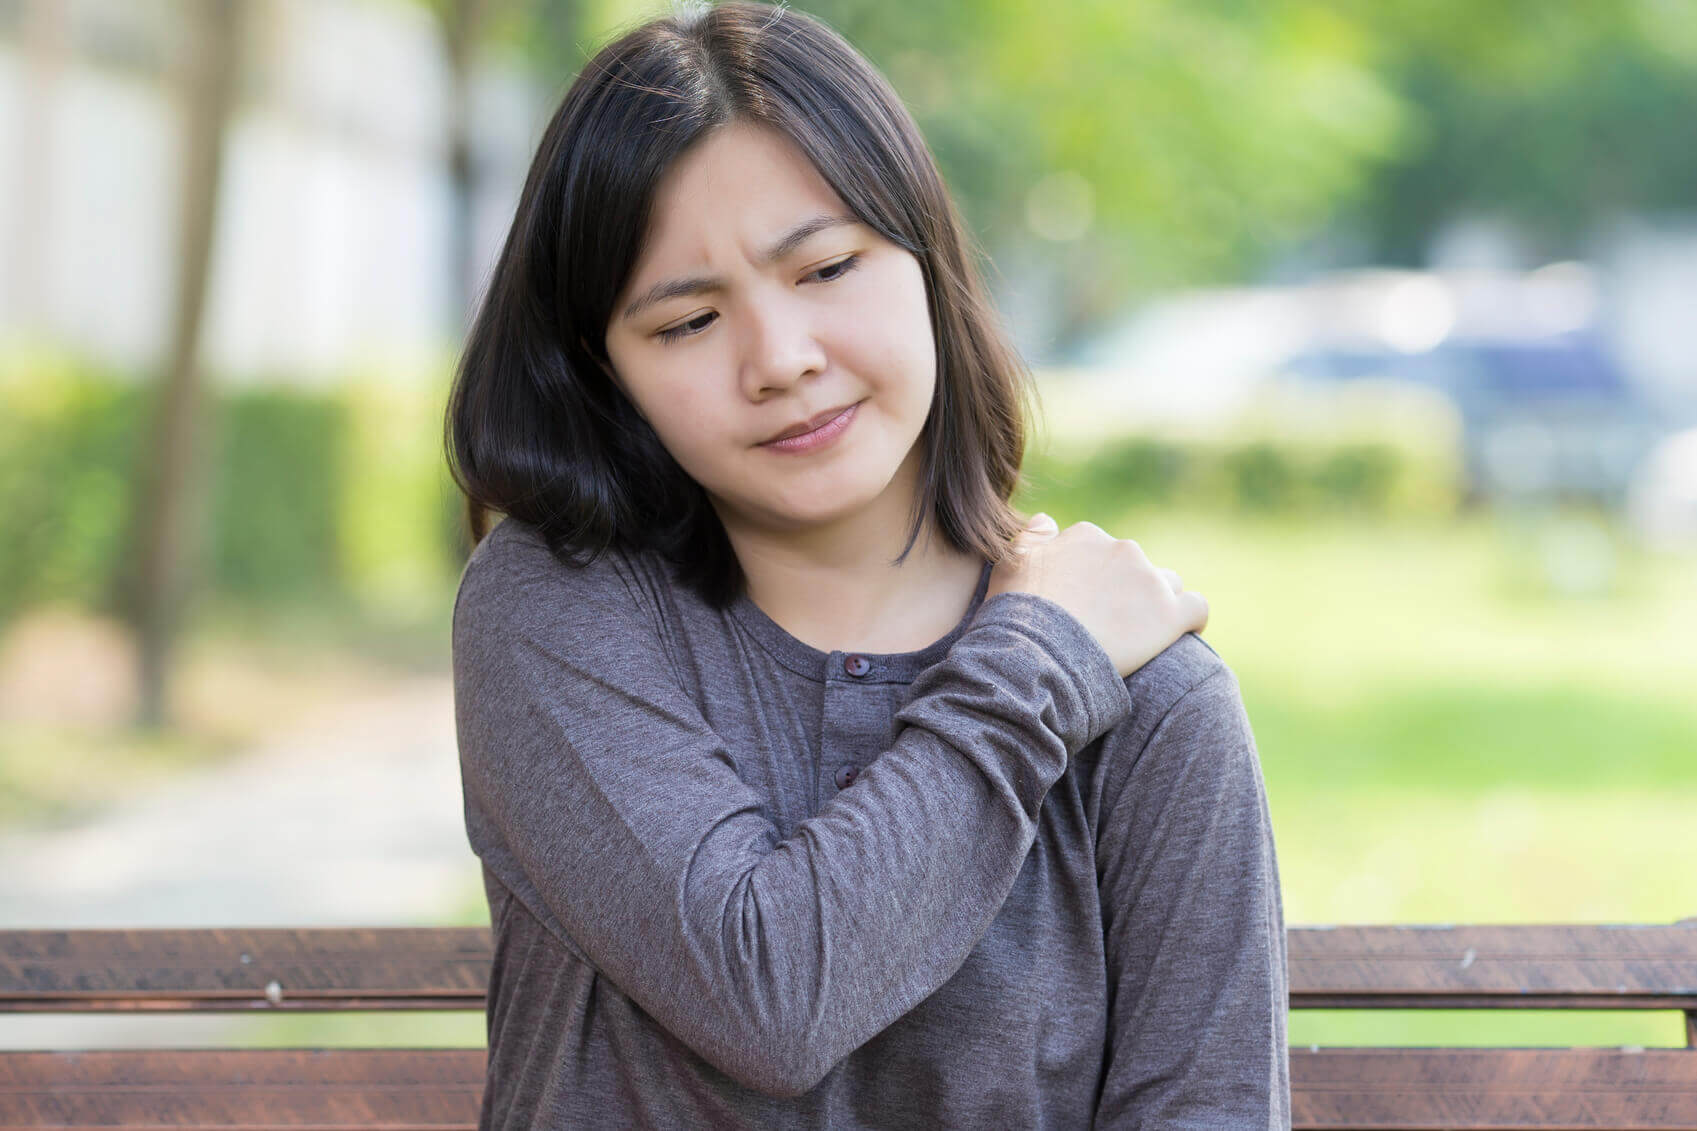 Breast Cancer and Rotator Cuff Pain